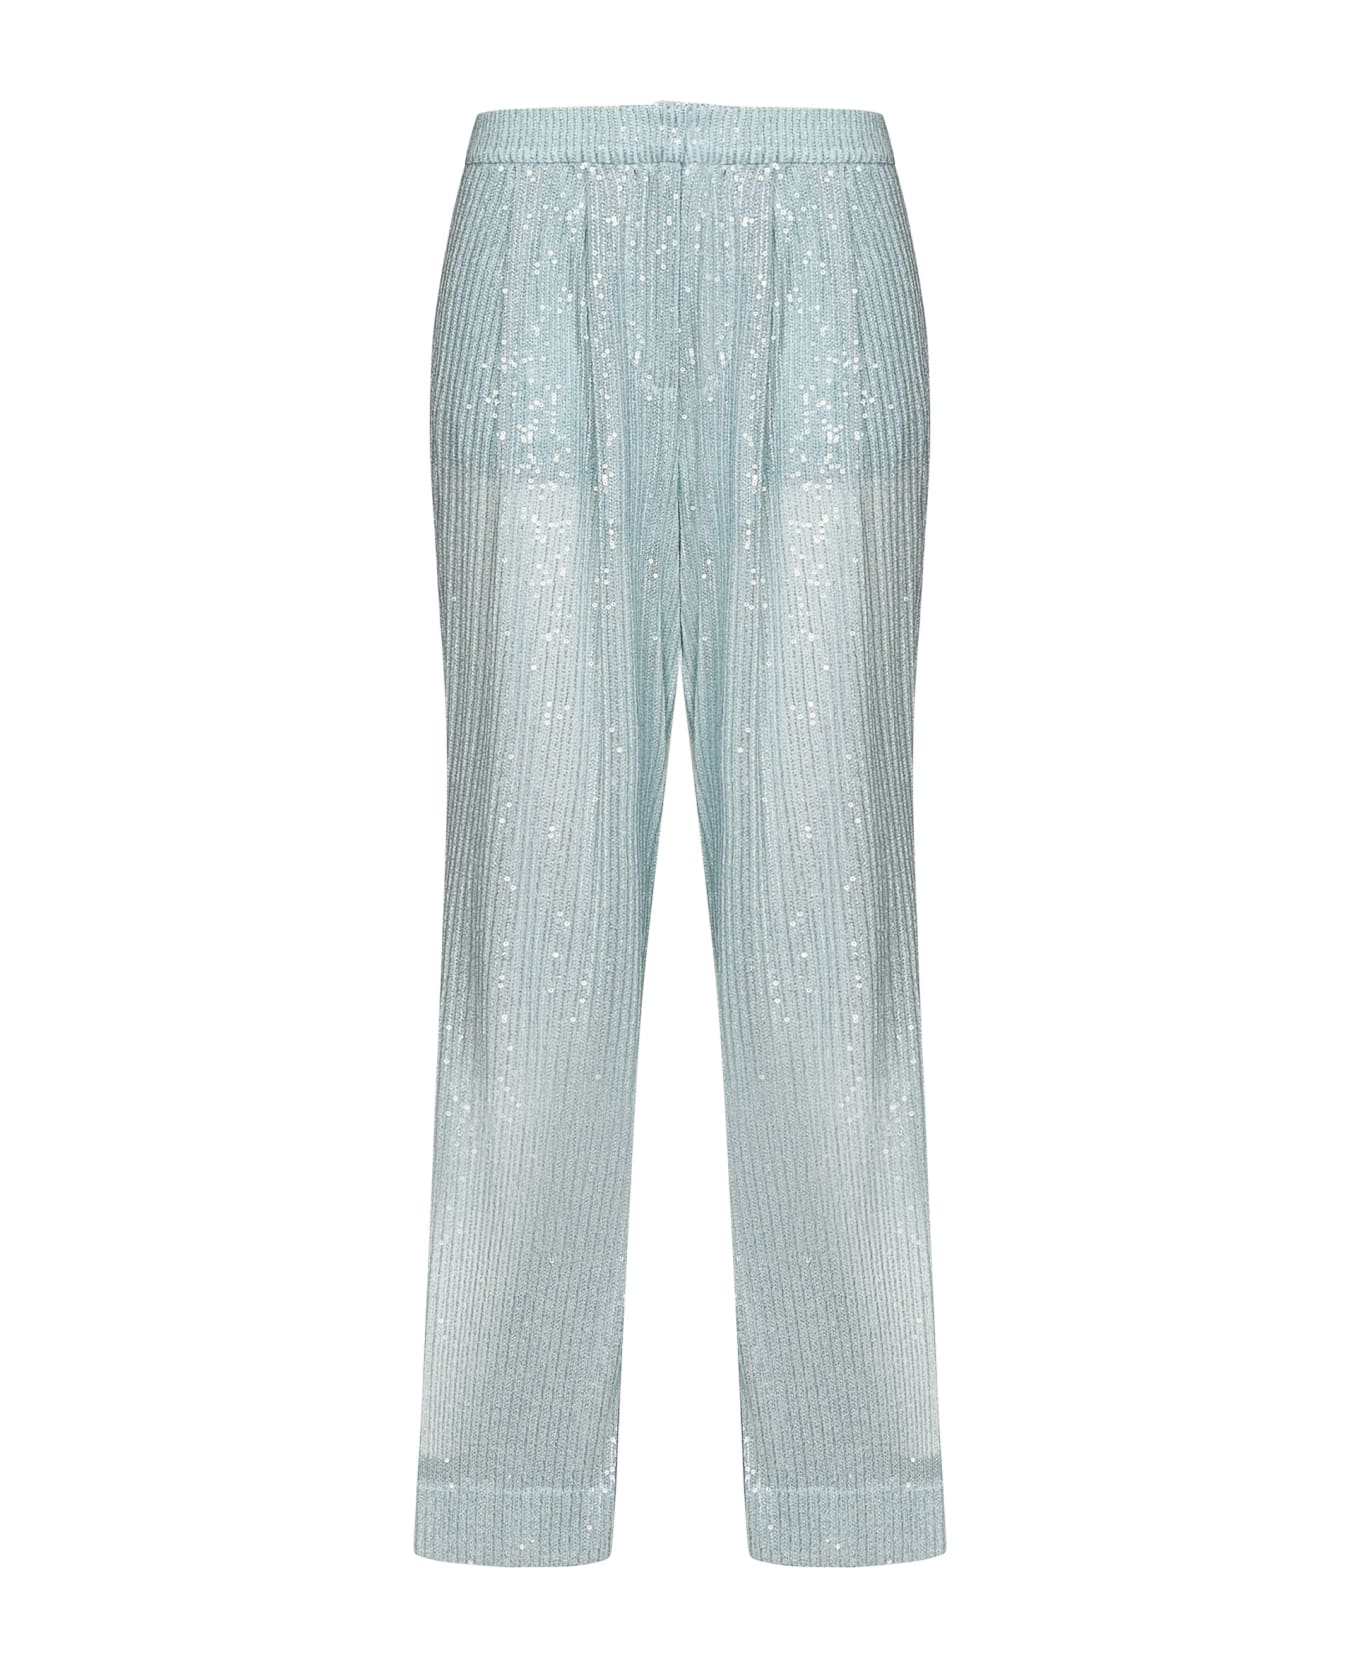 Rotate by Birger Christensen Trousers - Blue